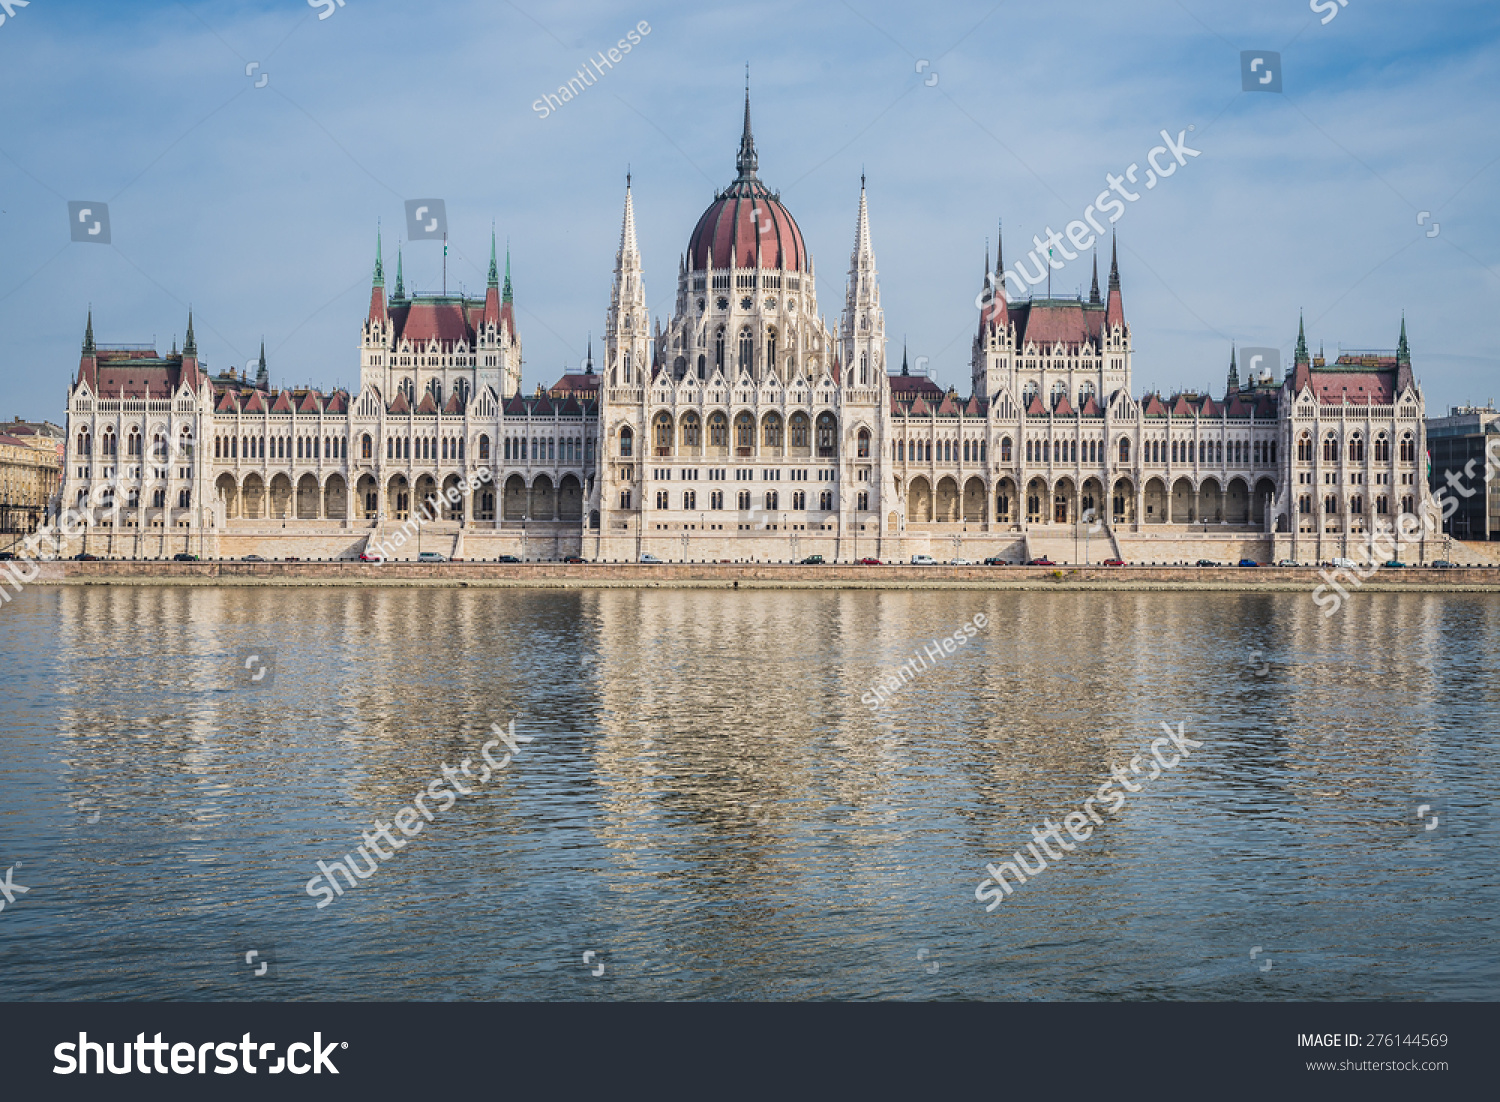 The parliament of Budapest reflecting in the Danube river in high resolution 